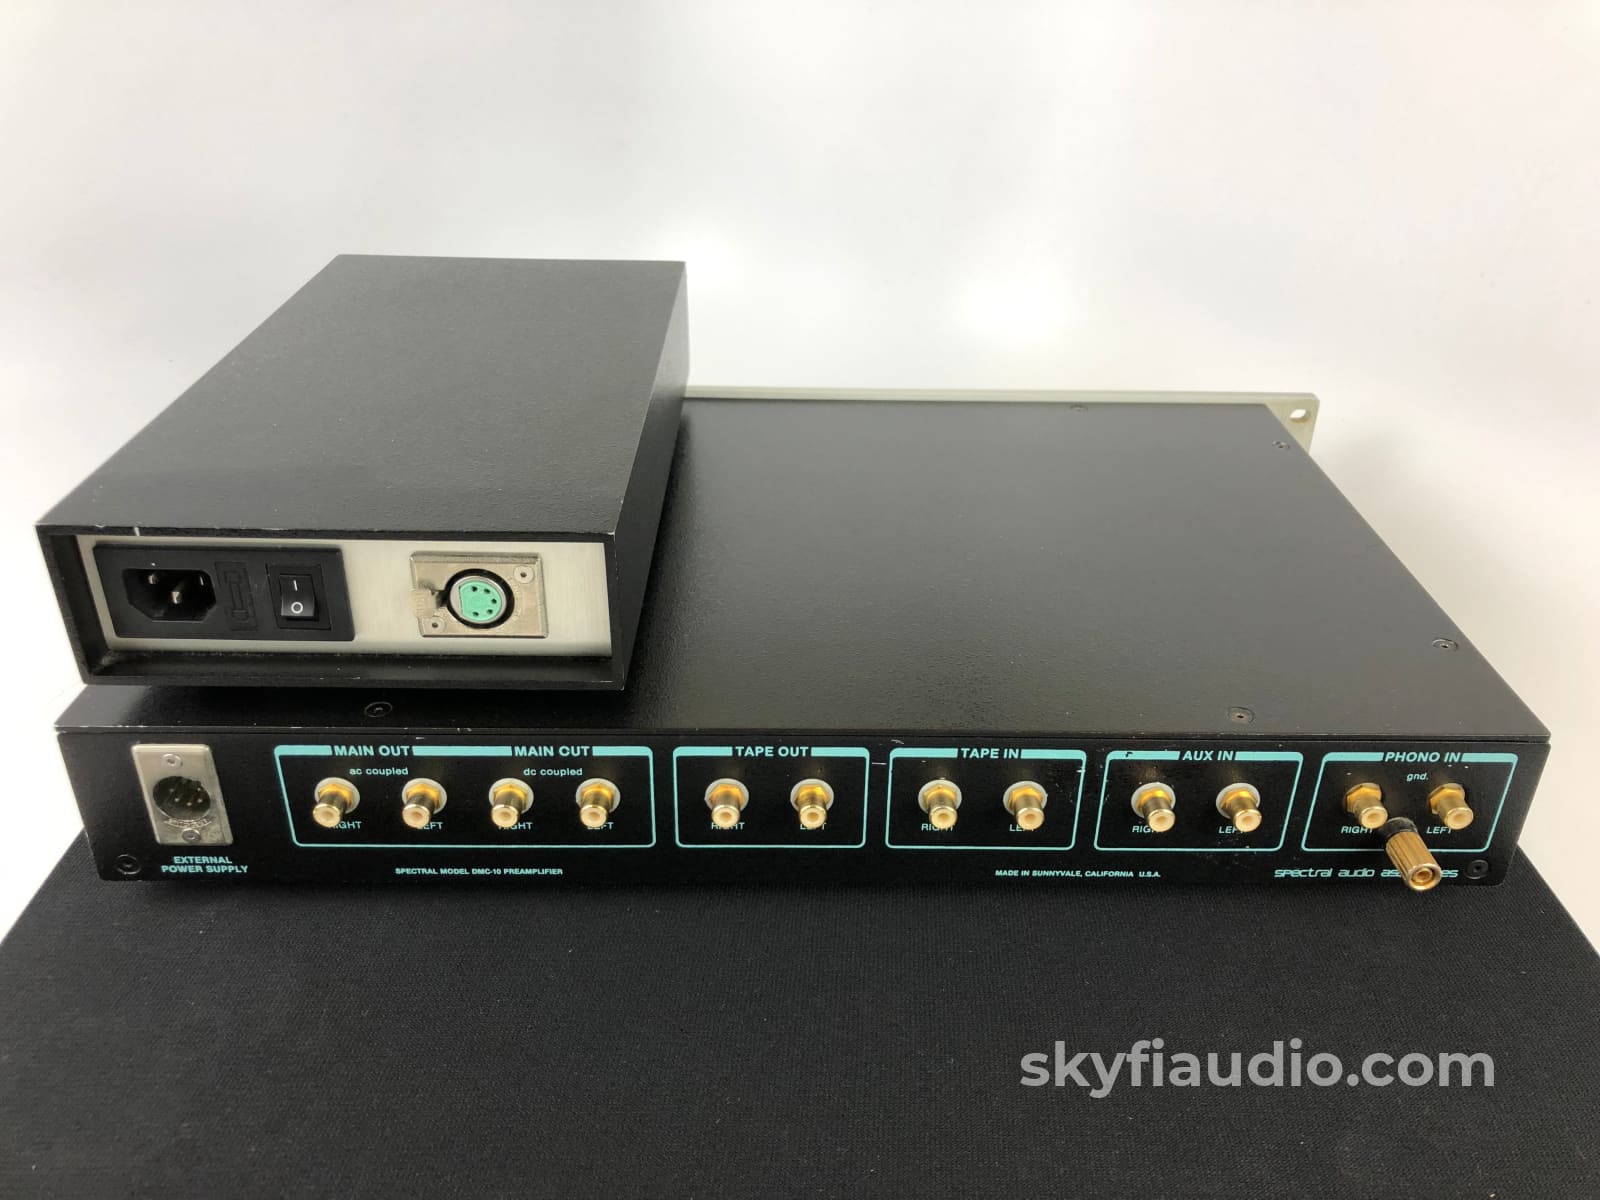 Spectral Dmc-10 Gamma Preamp With Phono Input Amplifier